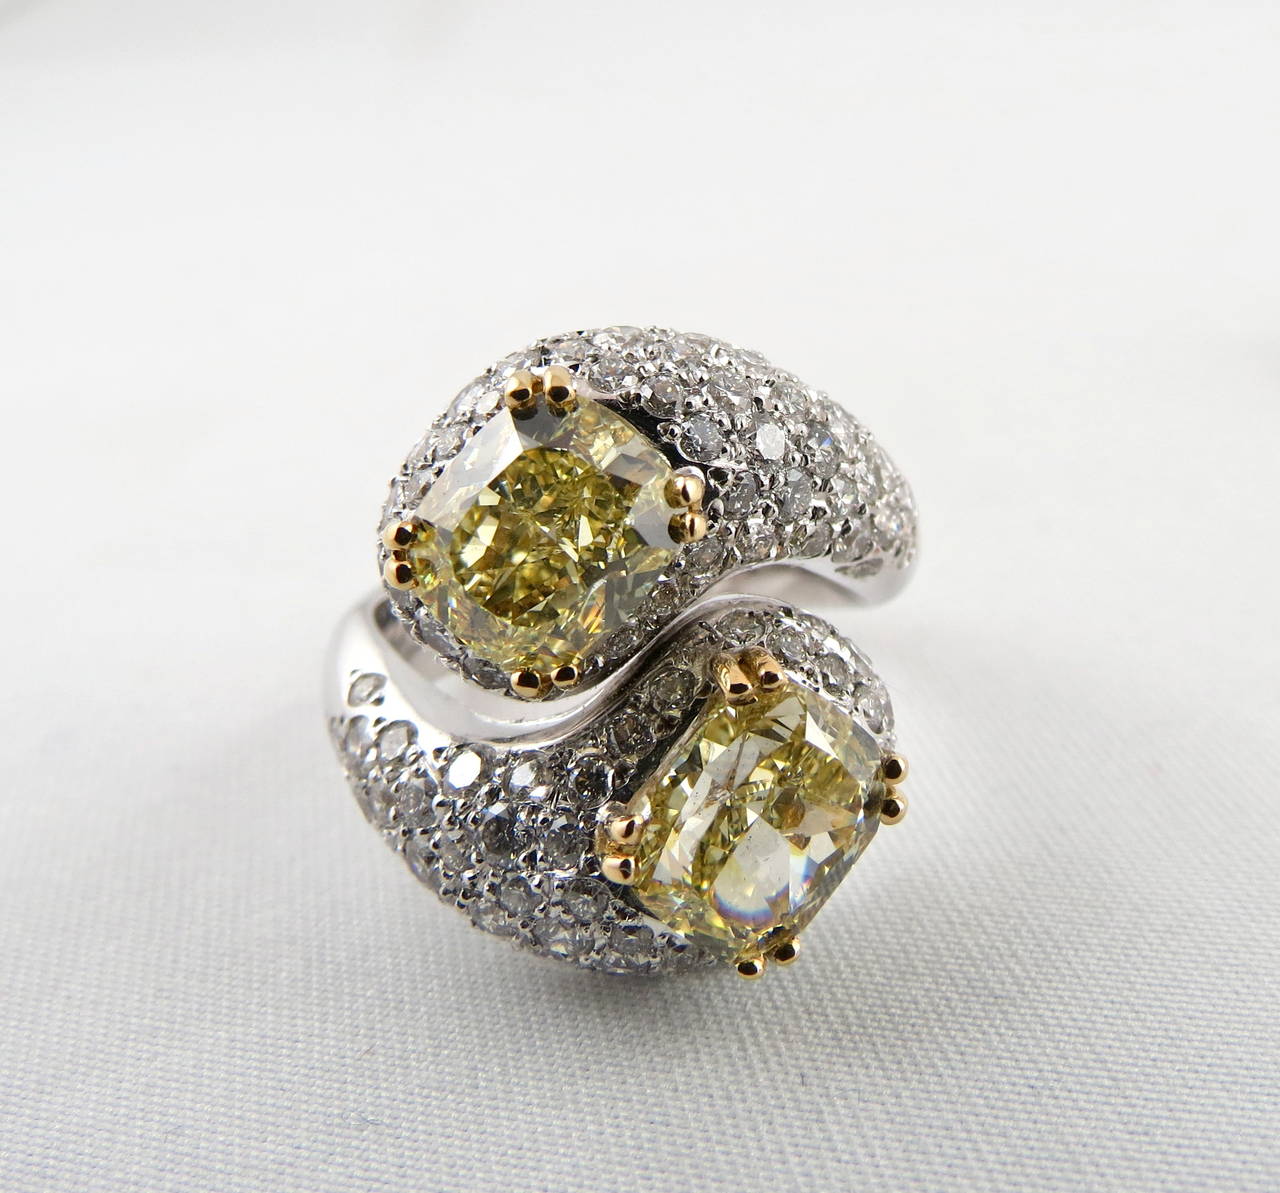 Magnificent Hand Crafted in Italy Crossover Natural Fancy Yellow Diamond Ring by Jona, Featuring Natural Fancy Yellow GIA Certified Diamonds.

One diamond is 
Color: Fancy Yellow 
Size: 1.86ct,
Clarity: VVS2
Cut: Cushion Modified